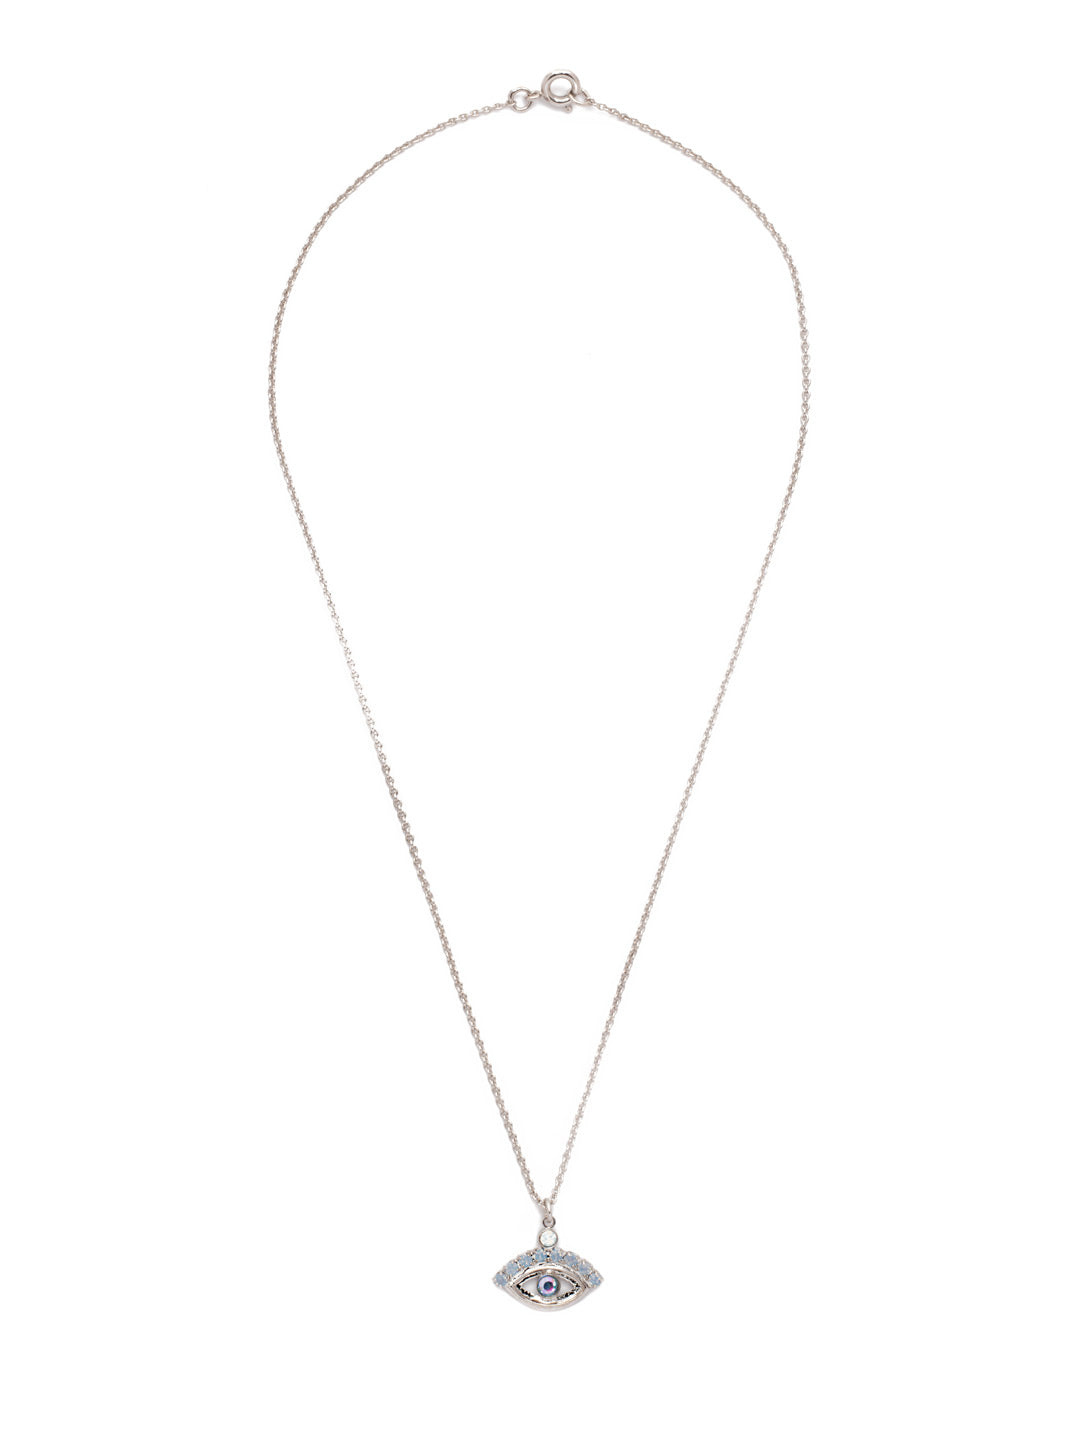 Mini Evil Eye Pendant Necklace - NEV6PDWNB - <p>A must for Evil Eye fans, our Mini Evil Eye Pendant Necklace makes a simple, yet sparkly, statement with crystals. From Sorrelli's Windsor Blue collection in our Palladium finish.</p>